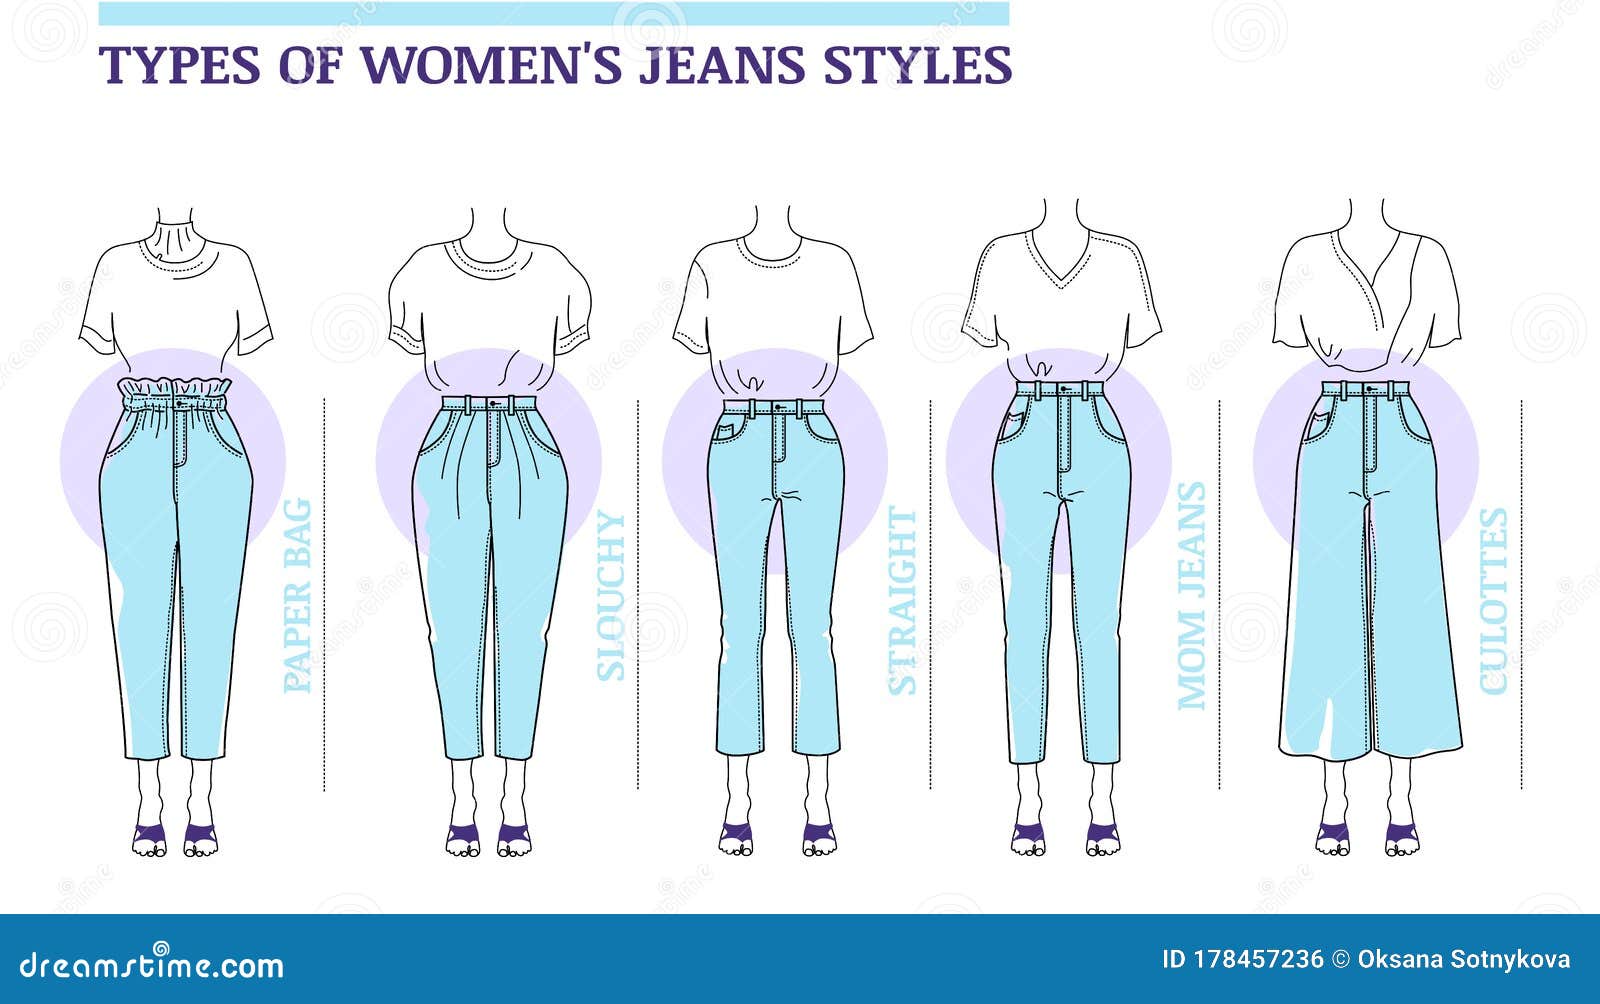 Discover more than 134 female jeans types